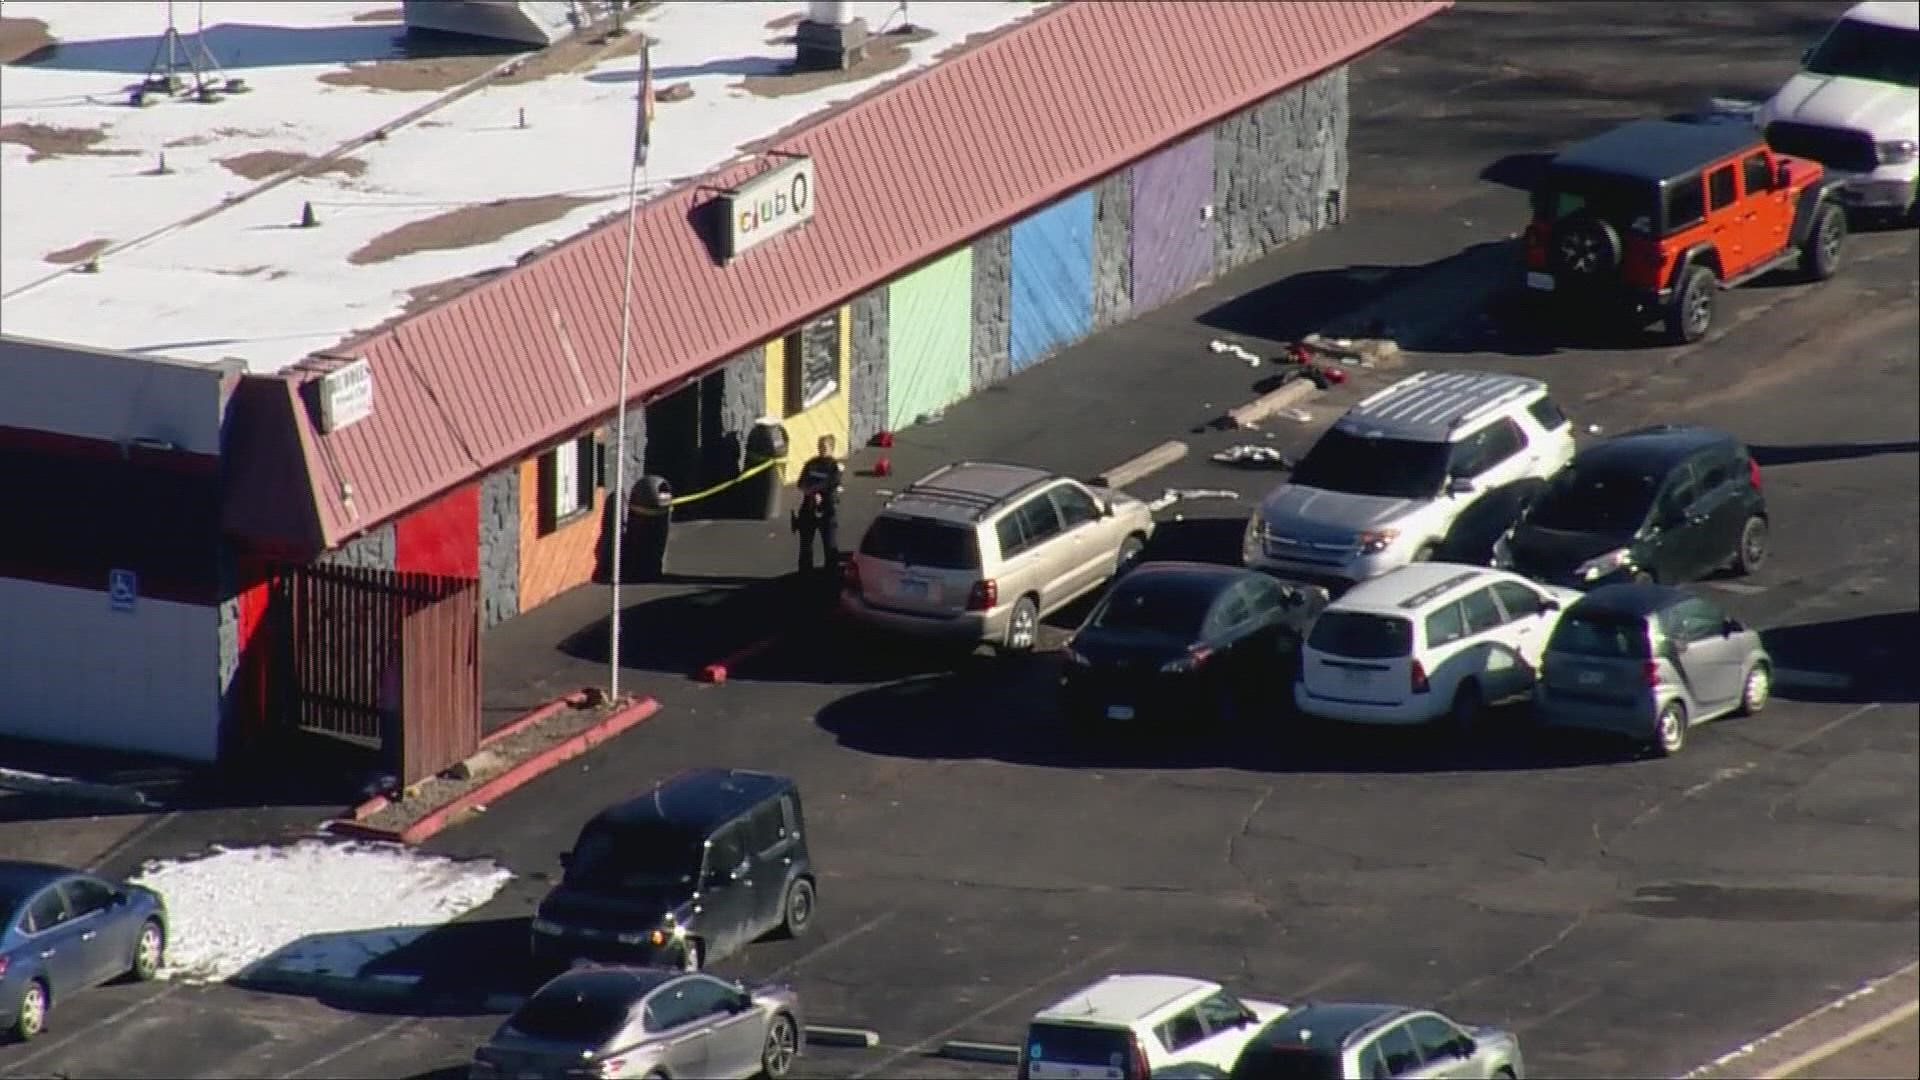 Aerial footage of the crime scene at Club Q in Colorado Springs following a mass shooting that left 5 people dead.